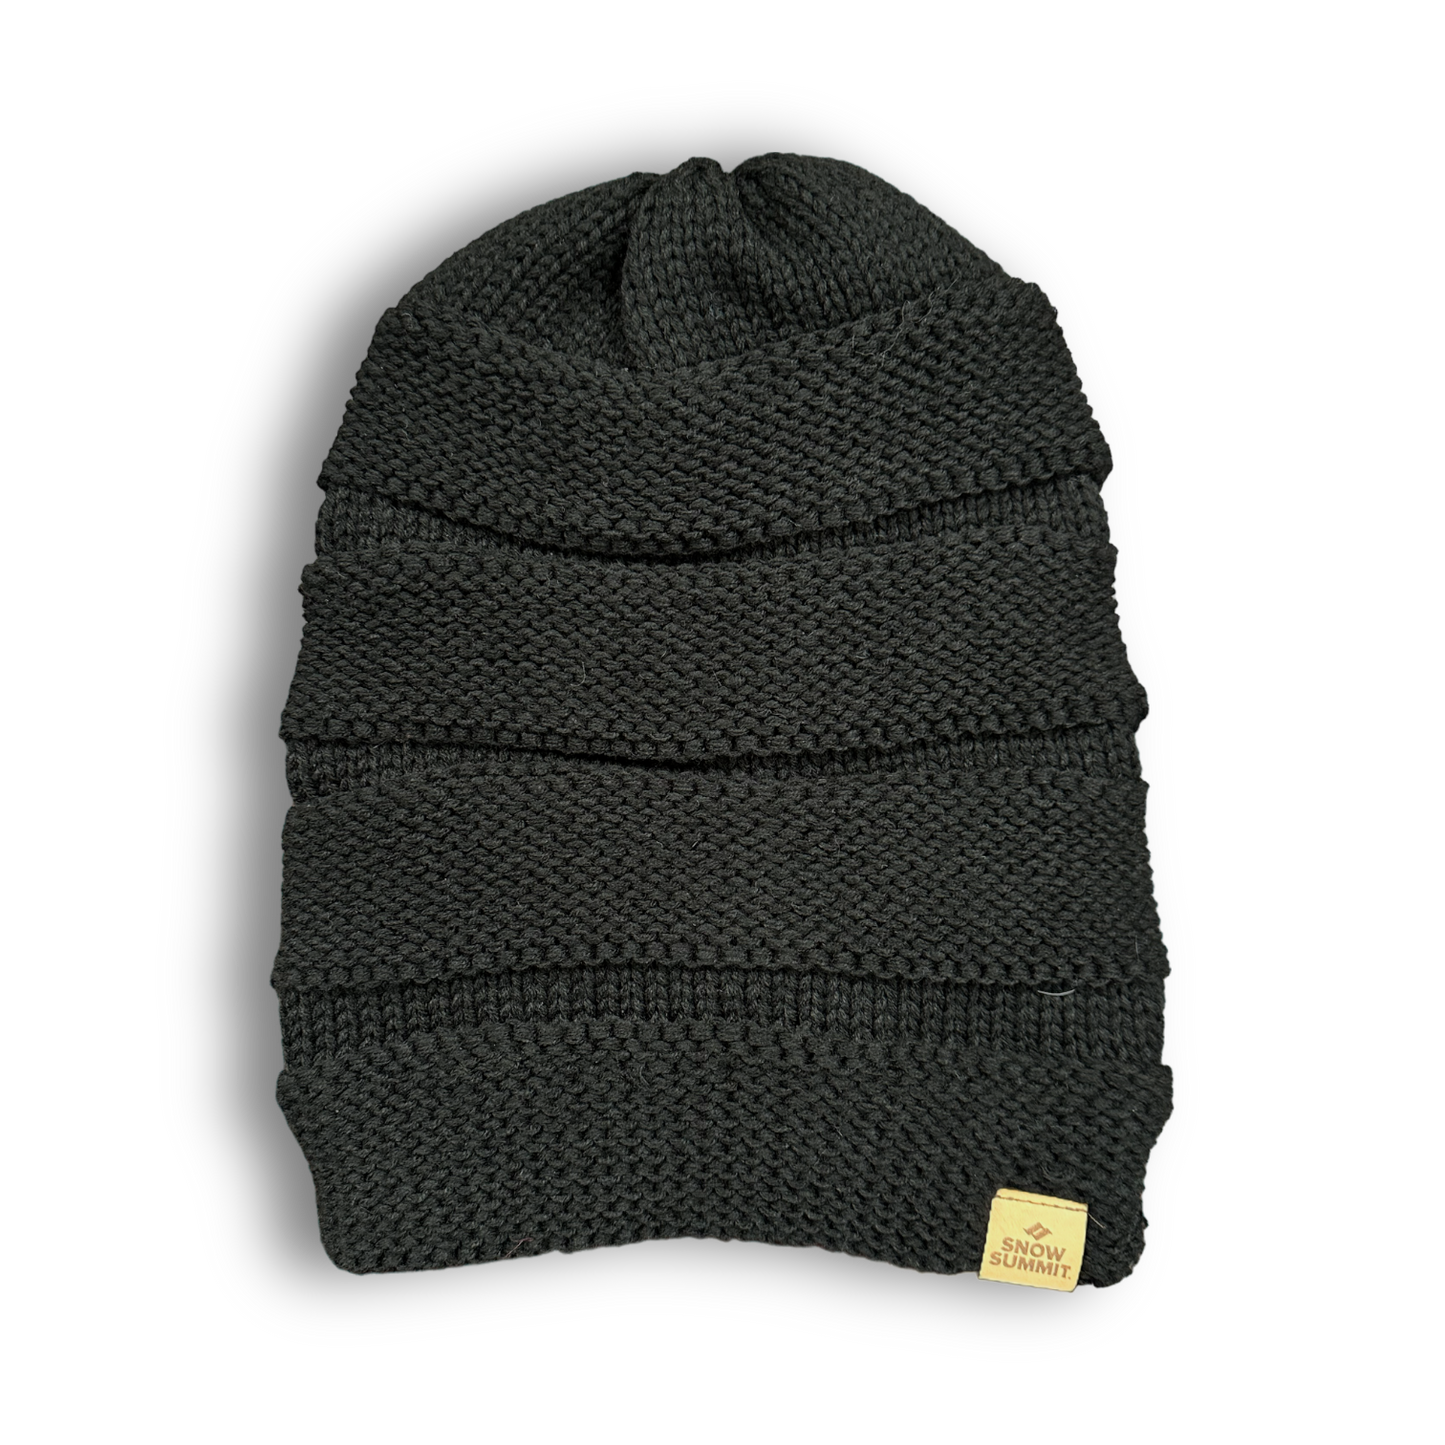 snow summit slouch beanie in black color with logo on bottom left corner